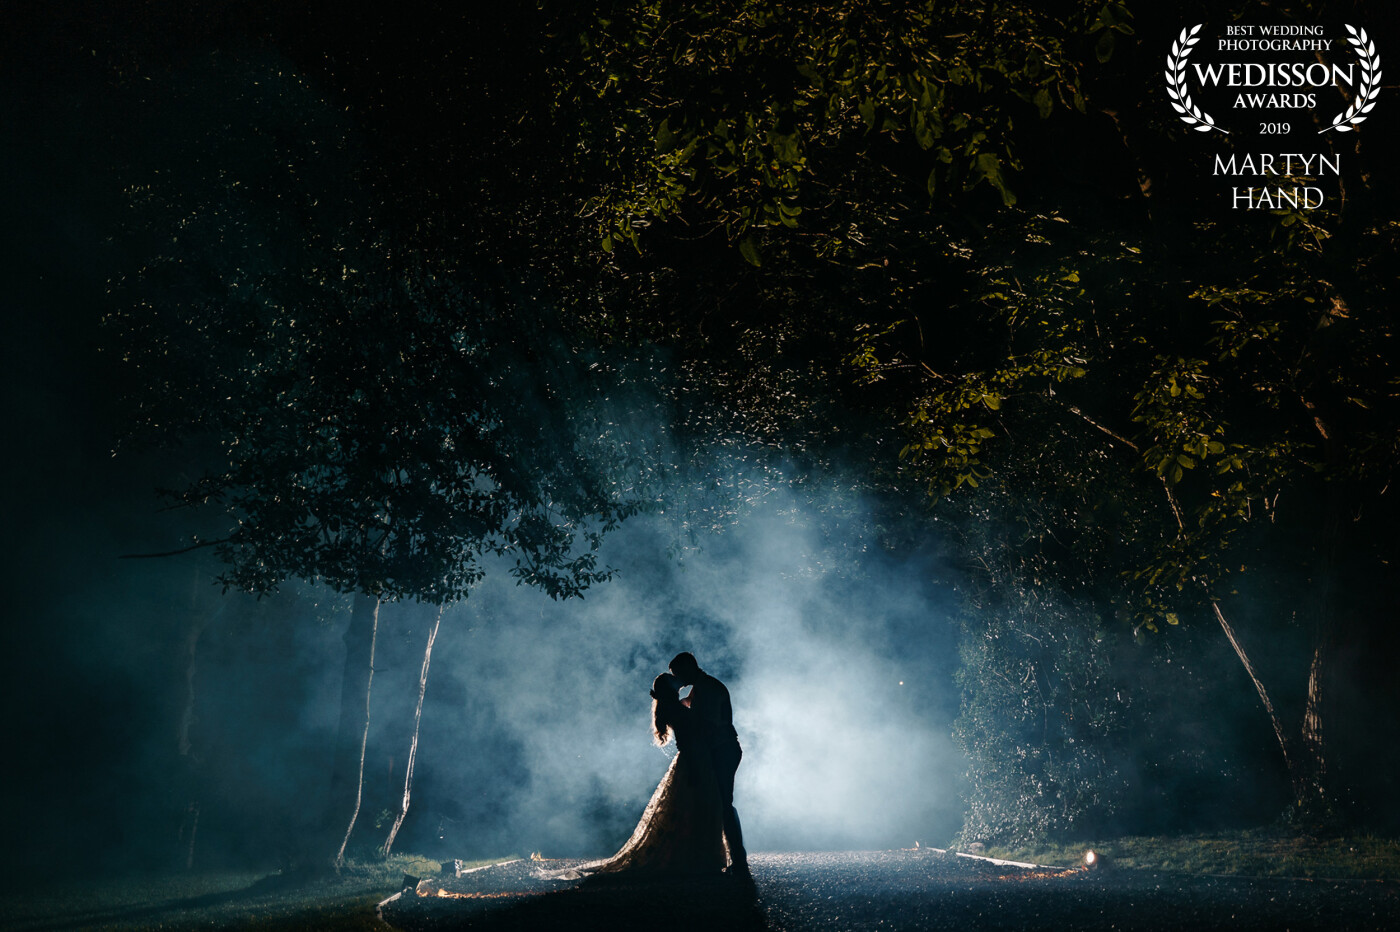 Katie & Jack really wanted something special for their wedding day! At the end of the night, we found a beautiful spot, played with smoke and made some art!